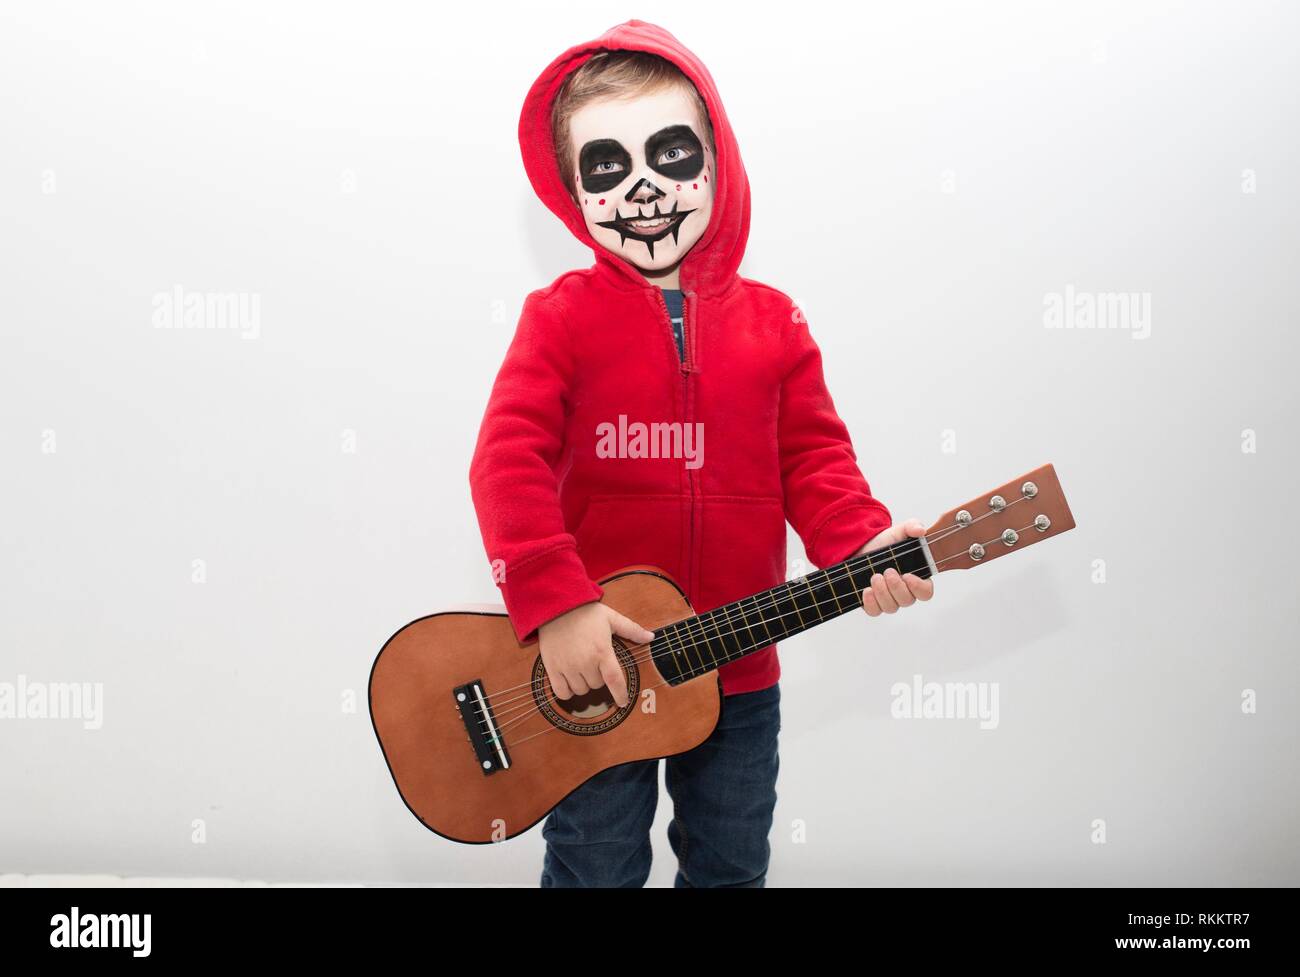 Little boy costumed as protagonist of Coco movie. Isolated over white. Stock Photo